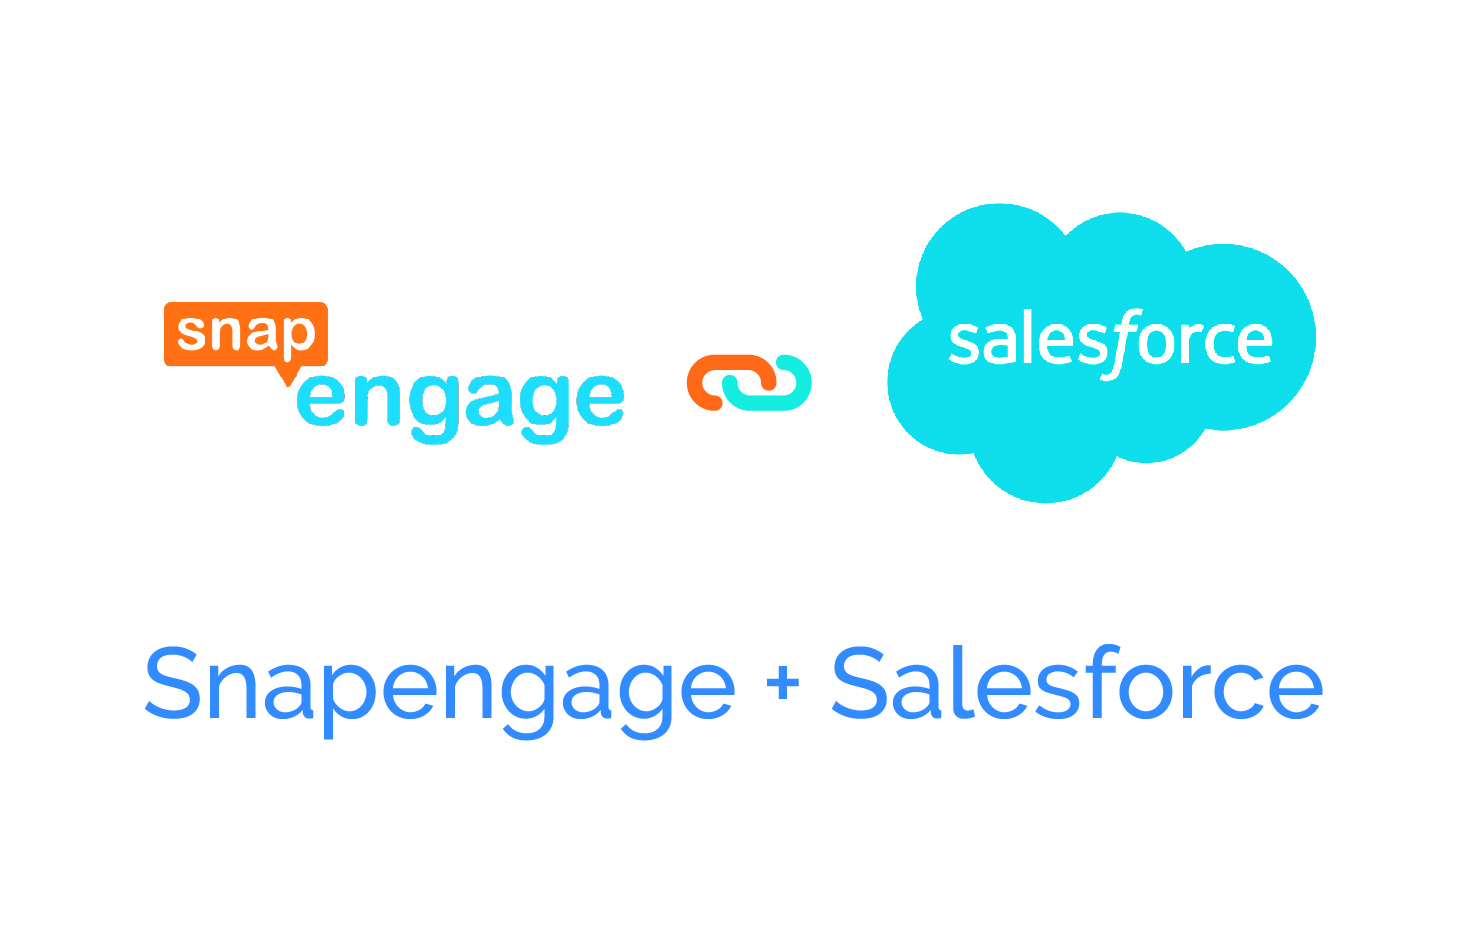 Snapengage and Salesforce